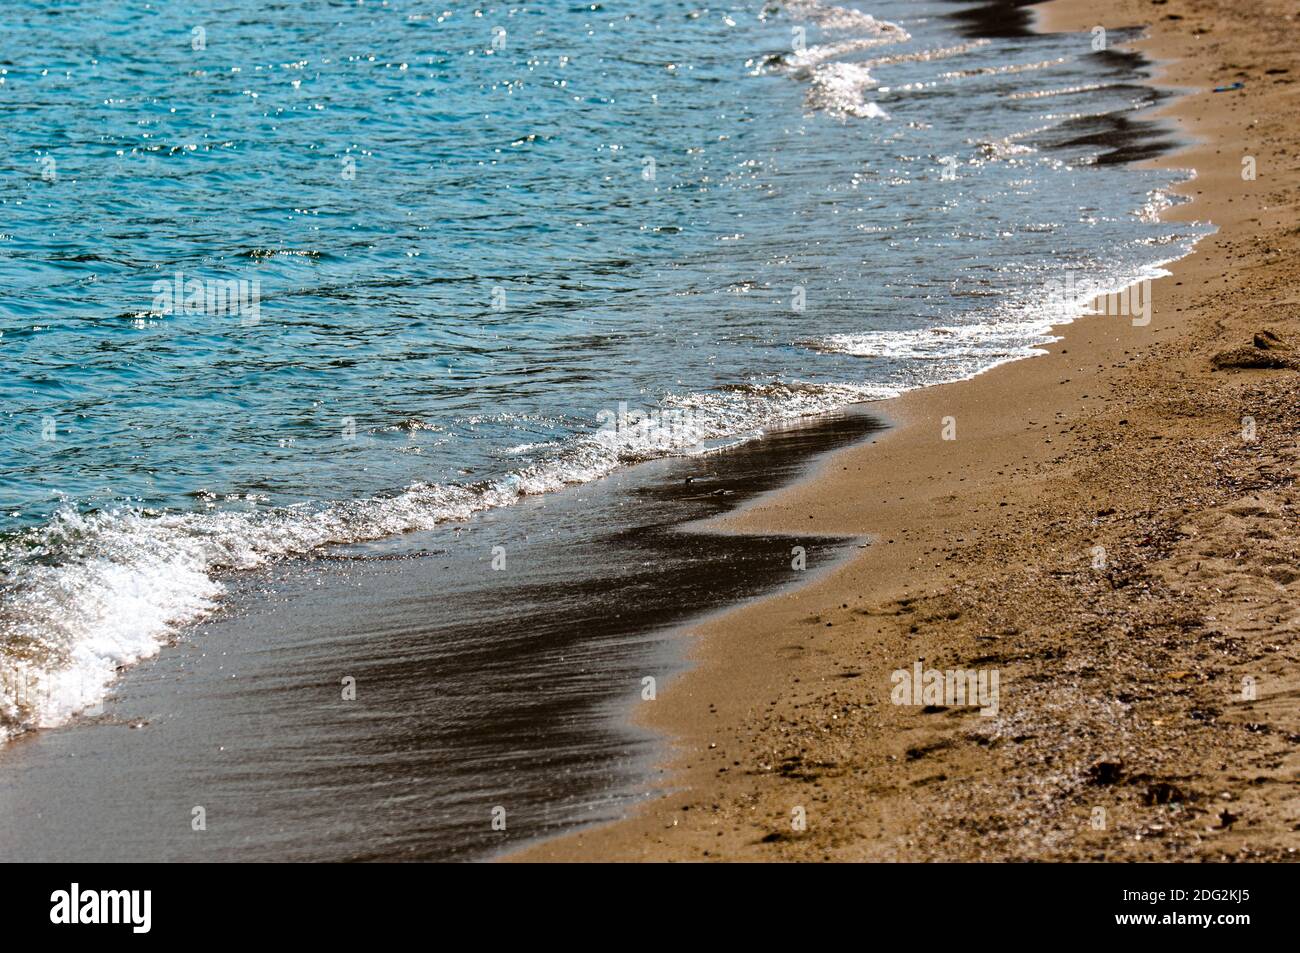 Tanquil scene at the shores of a sea Stock Photo